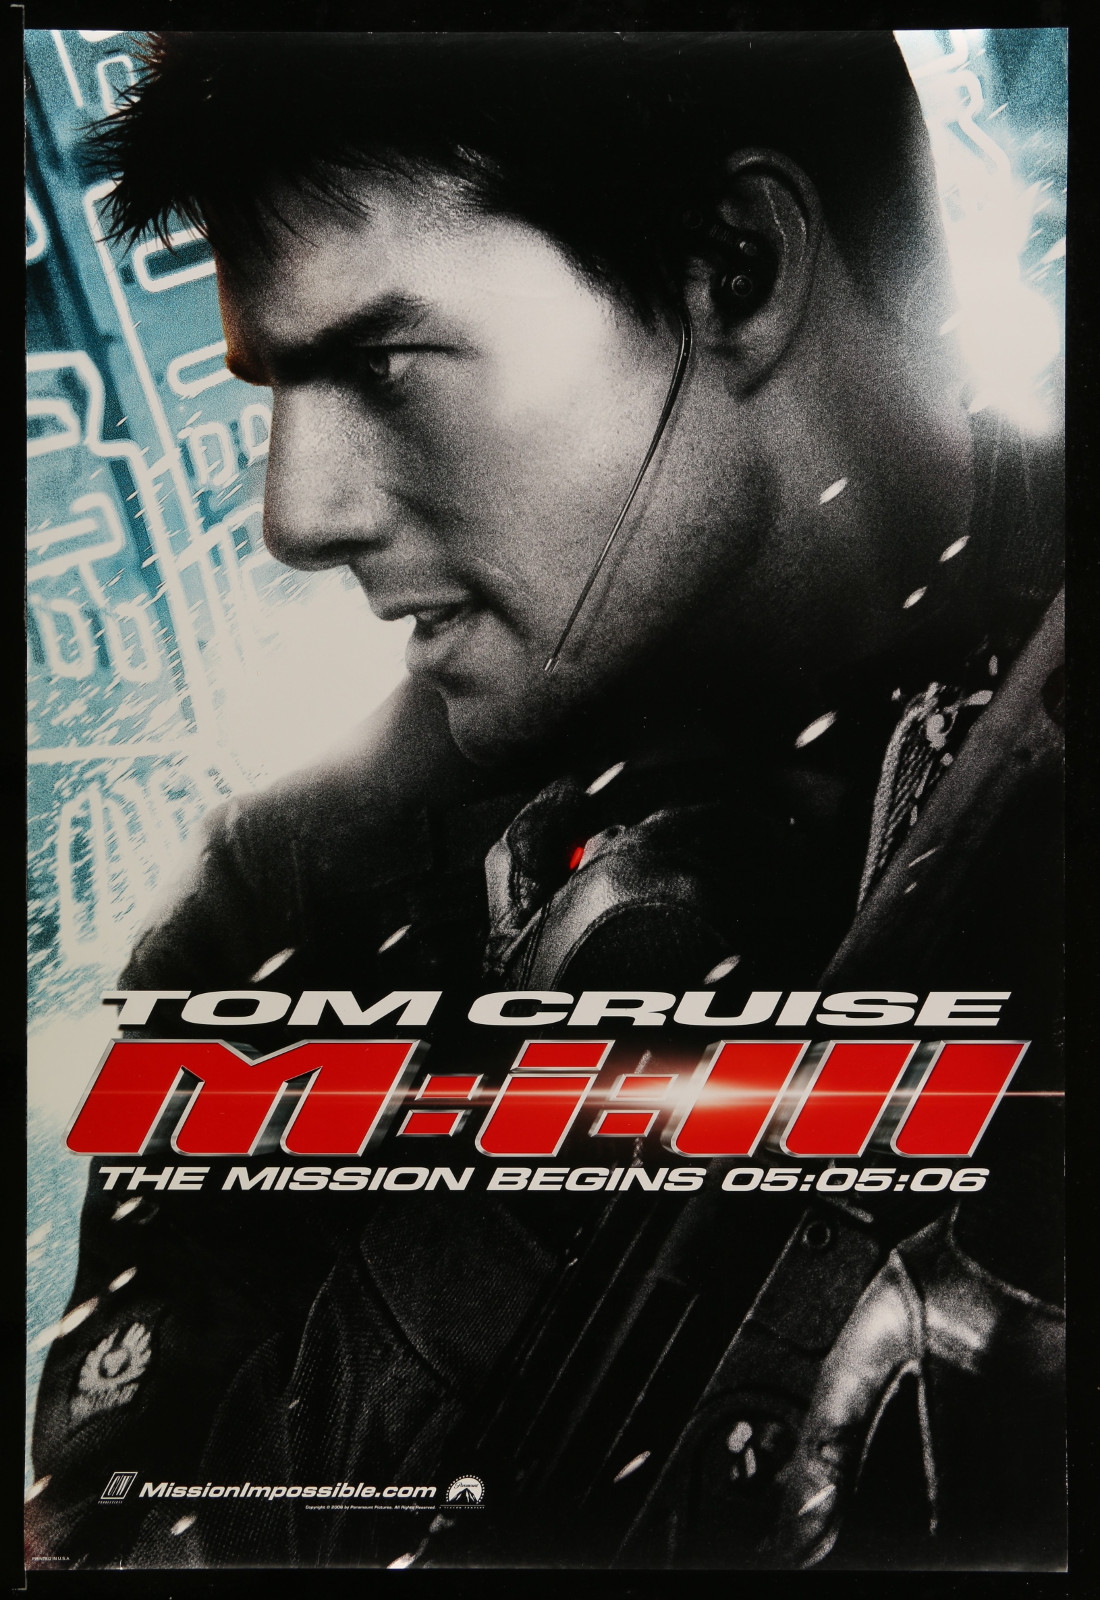 Mission Impossible Iii (Tom Cruise) 2A396 A Part Of A Lot 22 Unfolded Mostly Double-Sided 27X40 One-Sheets '00S A Variety Of Movie Images!